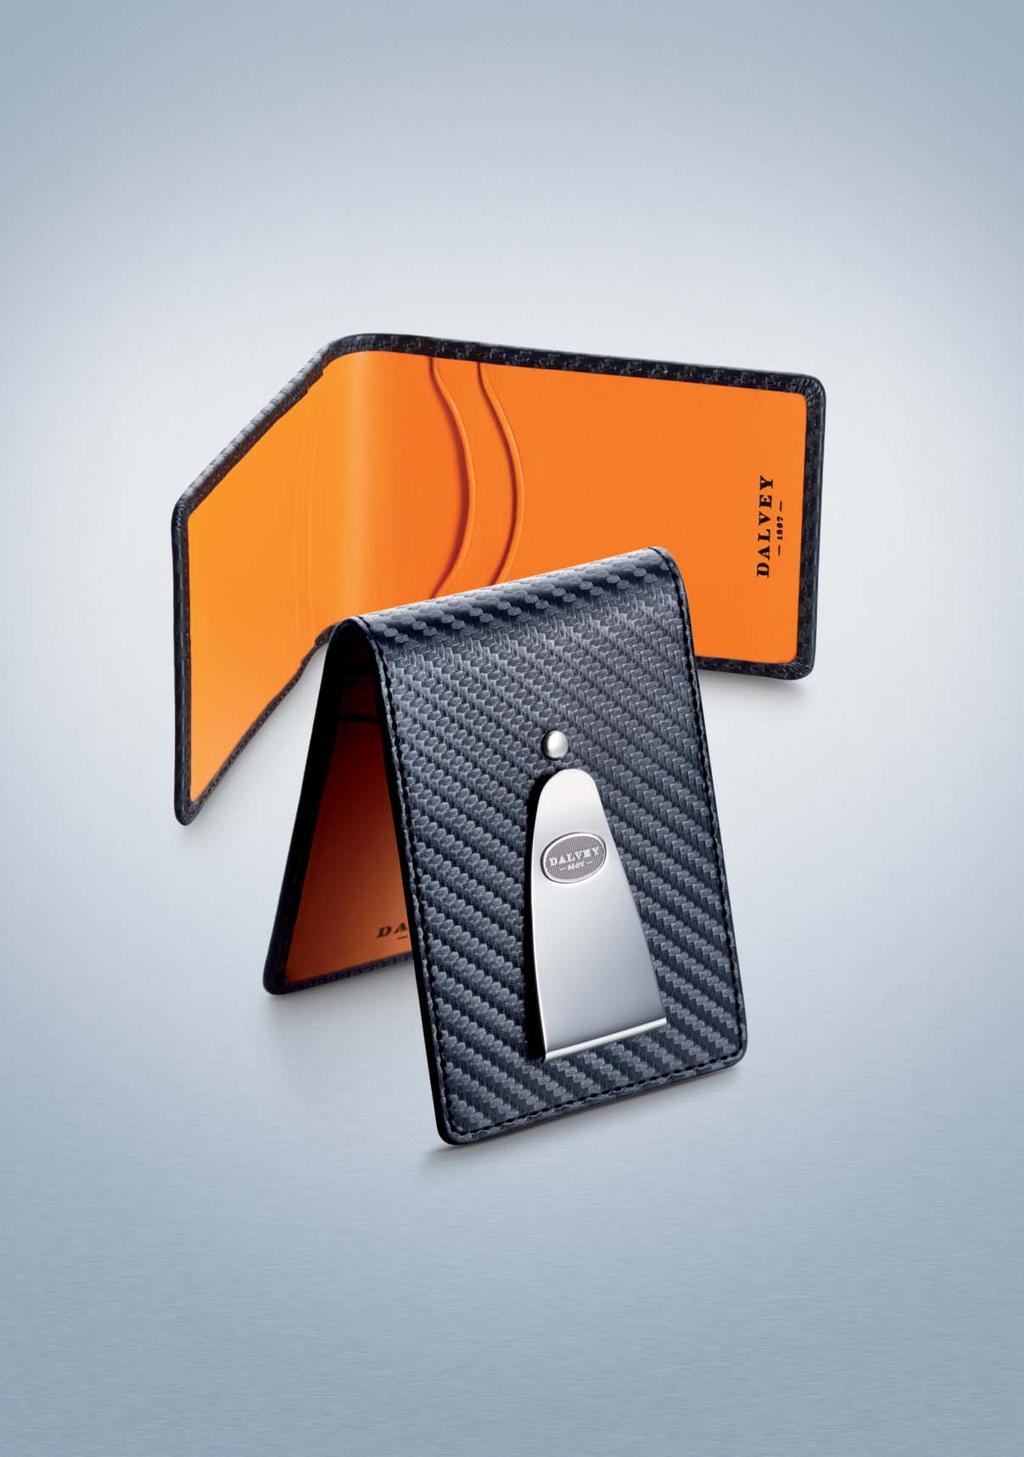 INSIGNIA WALLET The Insignia Wallet dramatically employs the sober and exuberant combination of vibrant orange and richly